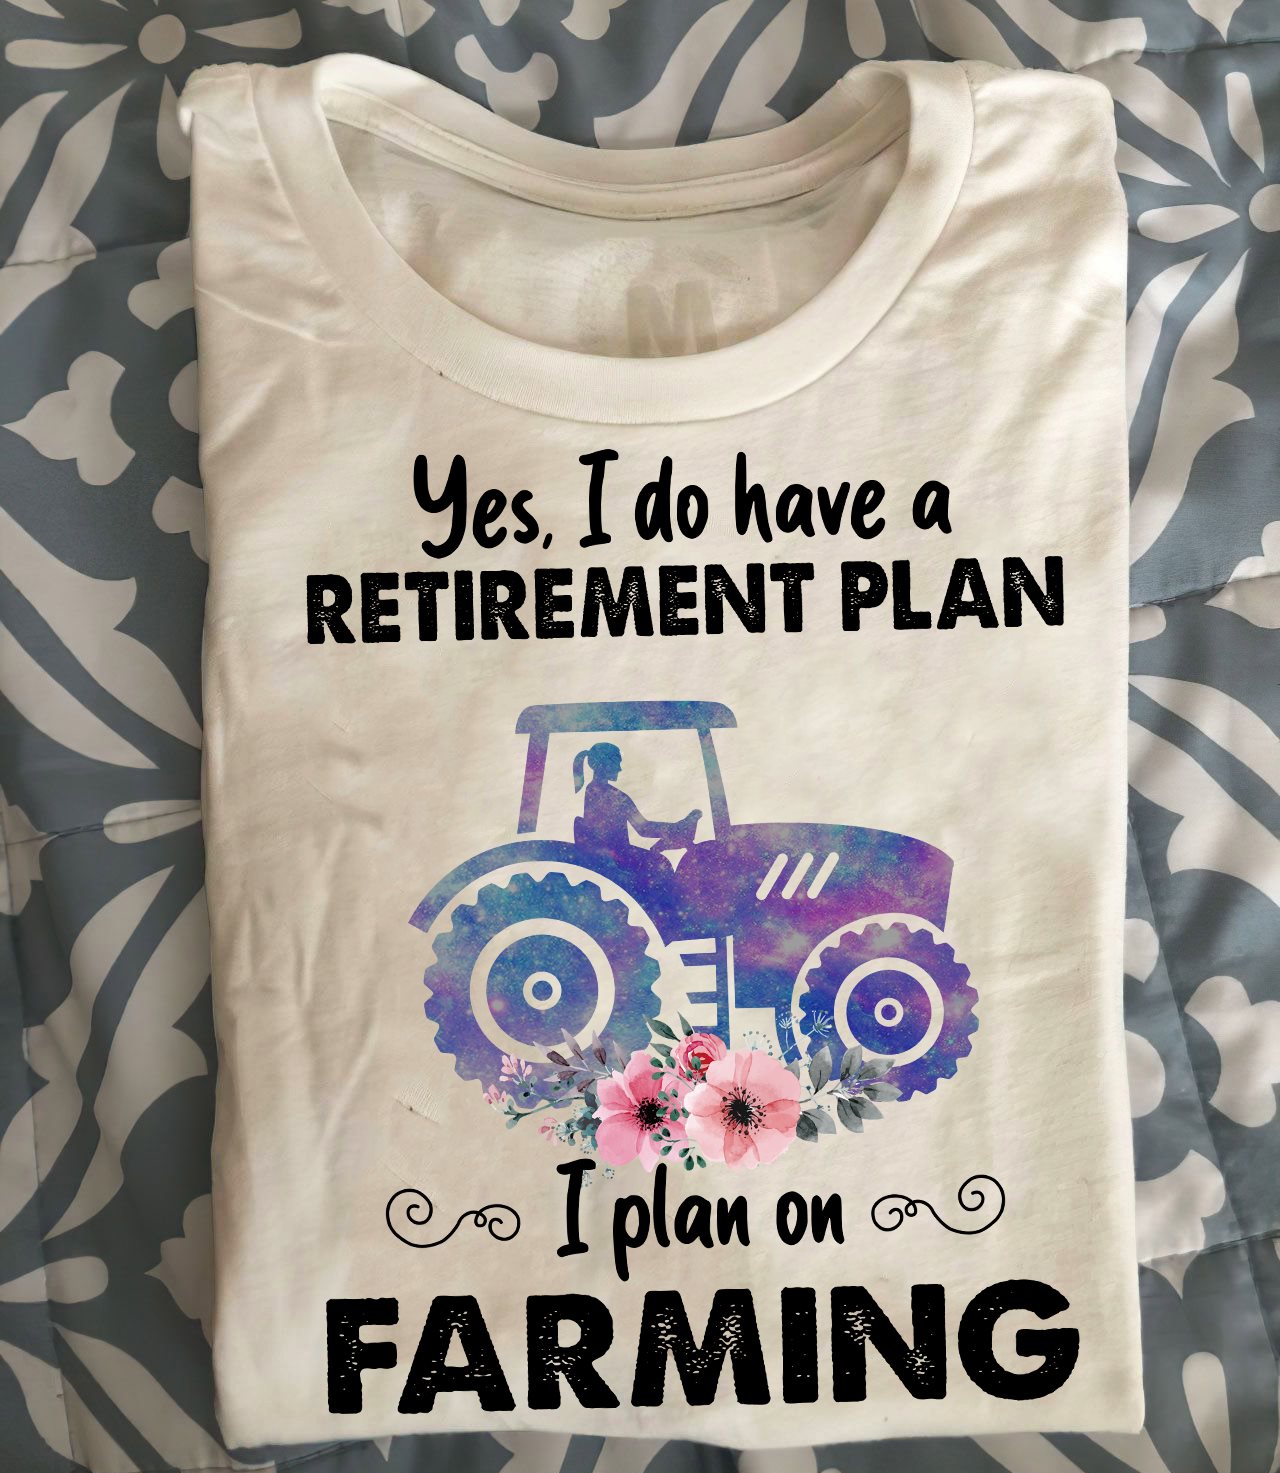 Yes, I do have a retirement plan I plan on farming - Girl driving tractor, woman farmer